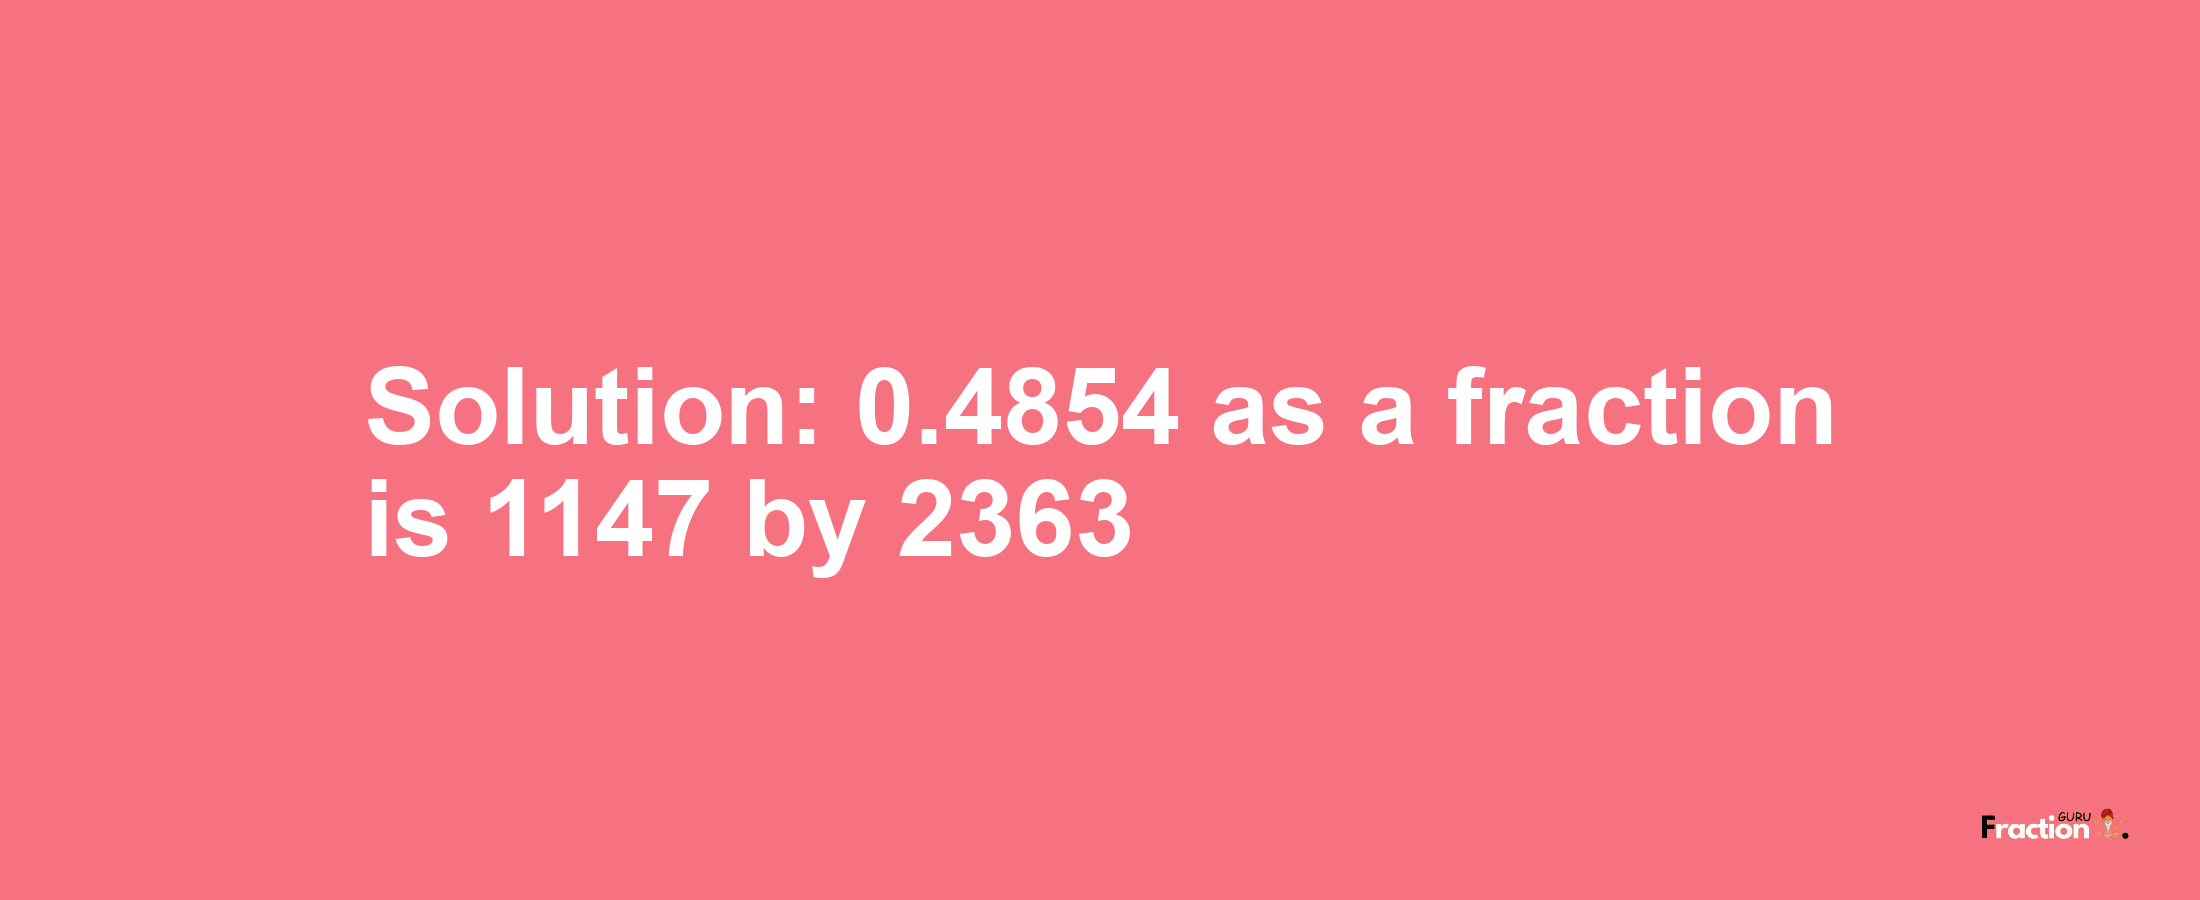 Solution:0.4854 as a fraction is 1147/2363